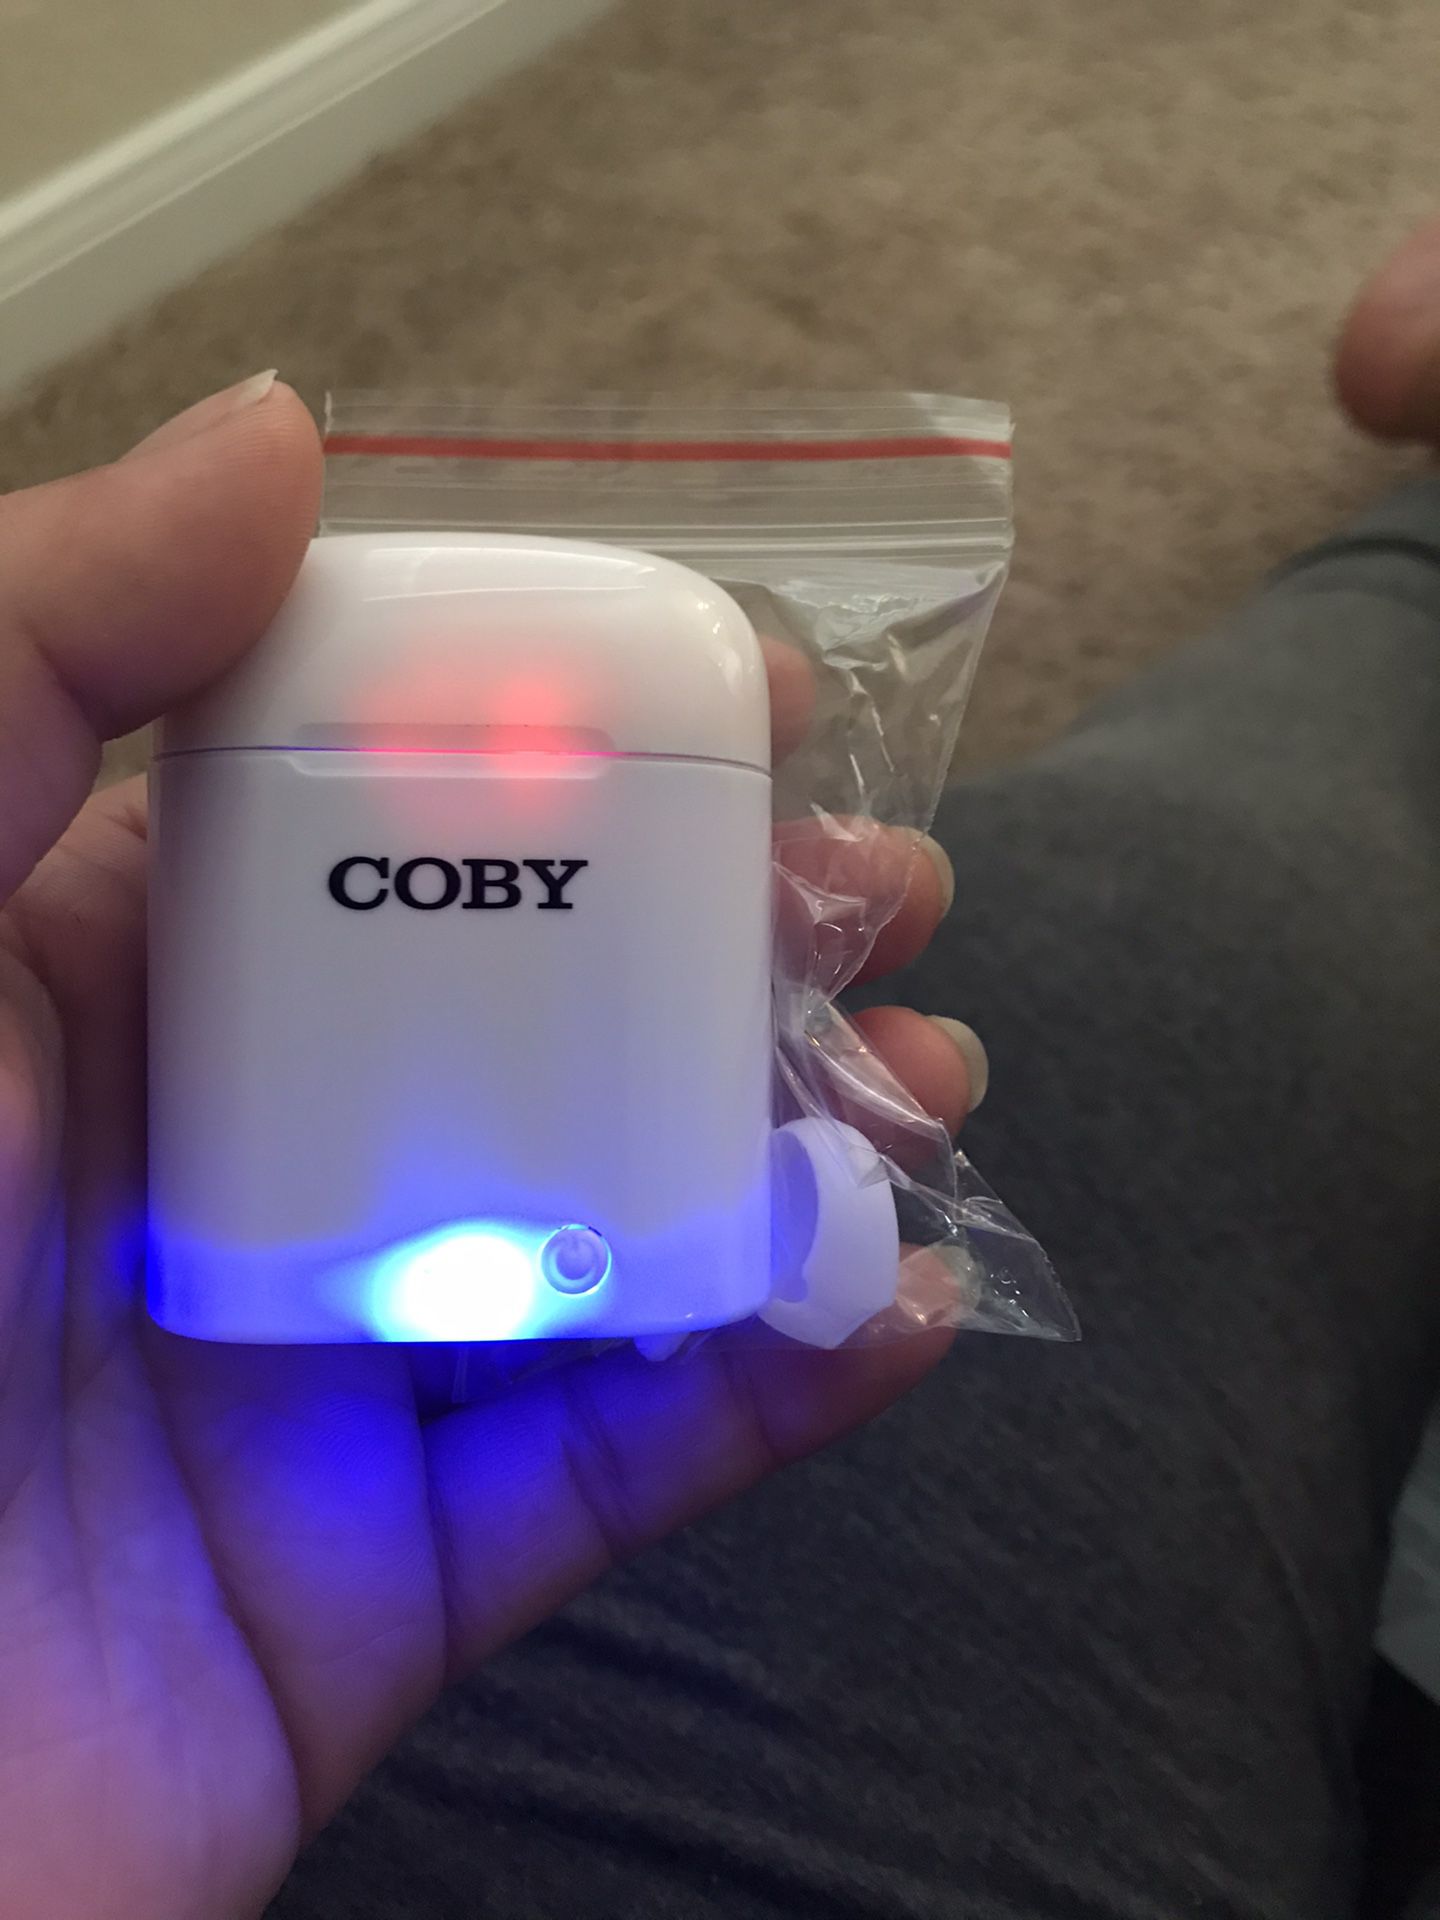 Colby earbuds